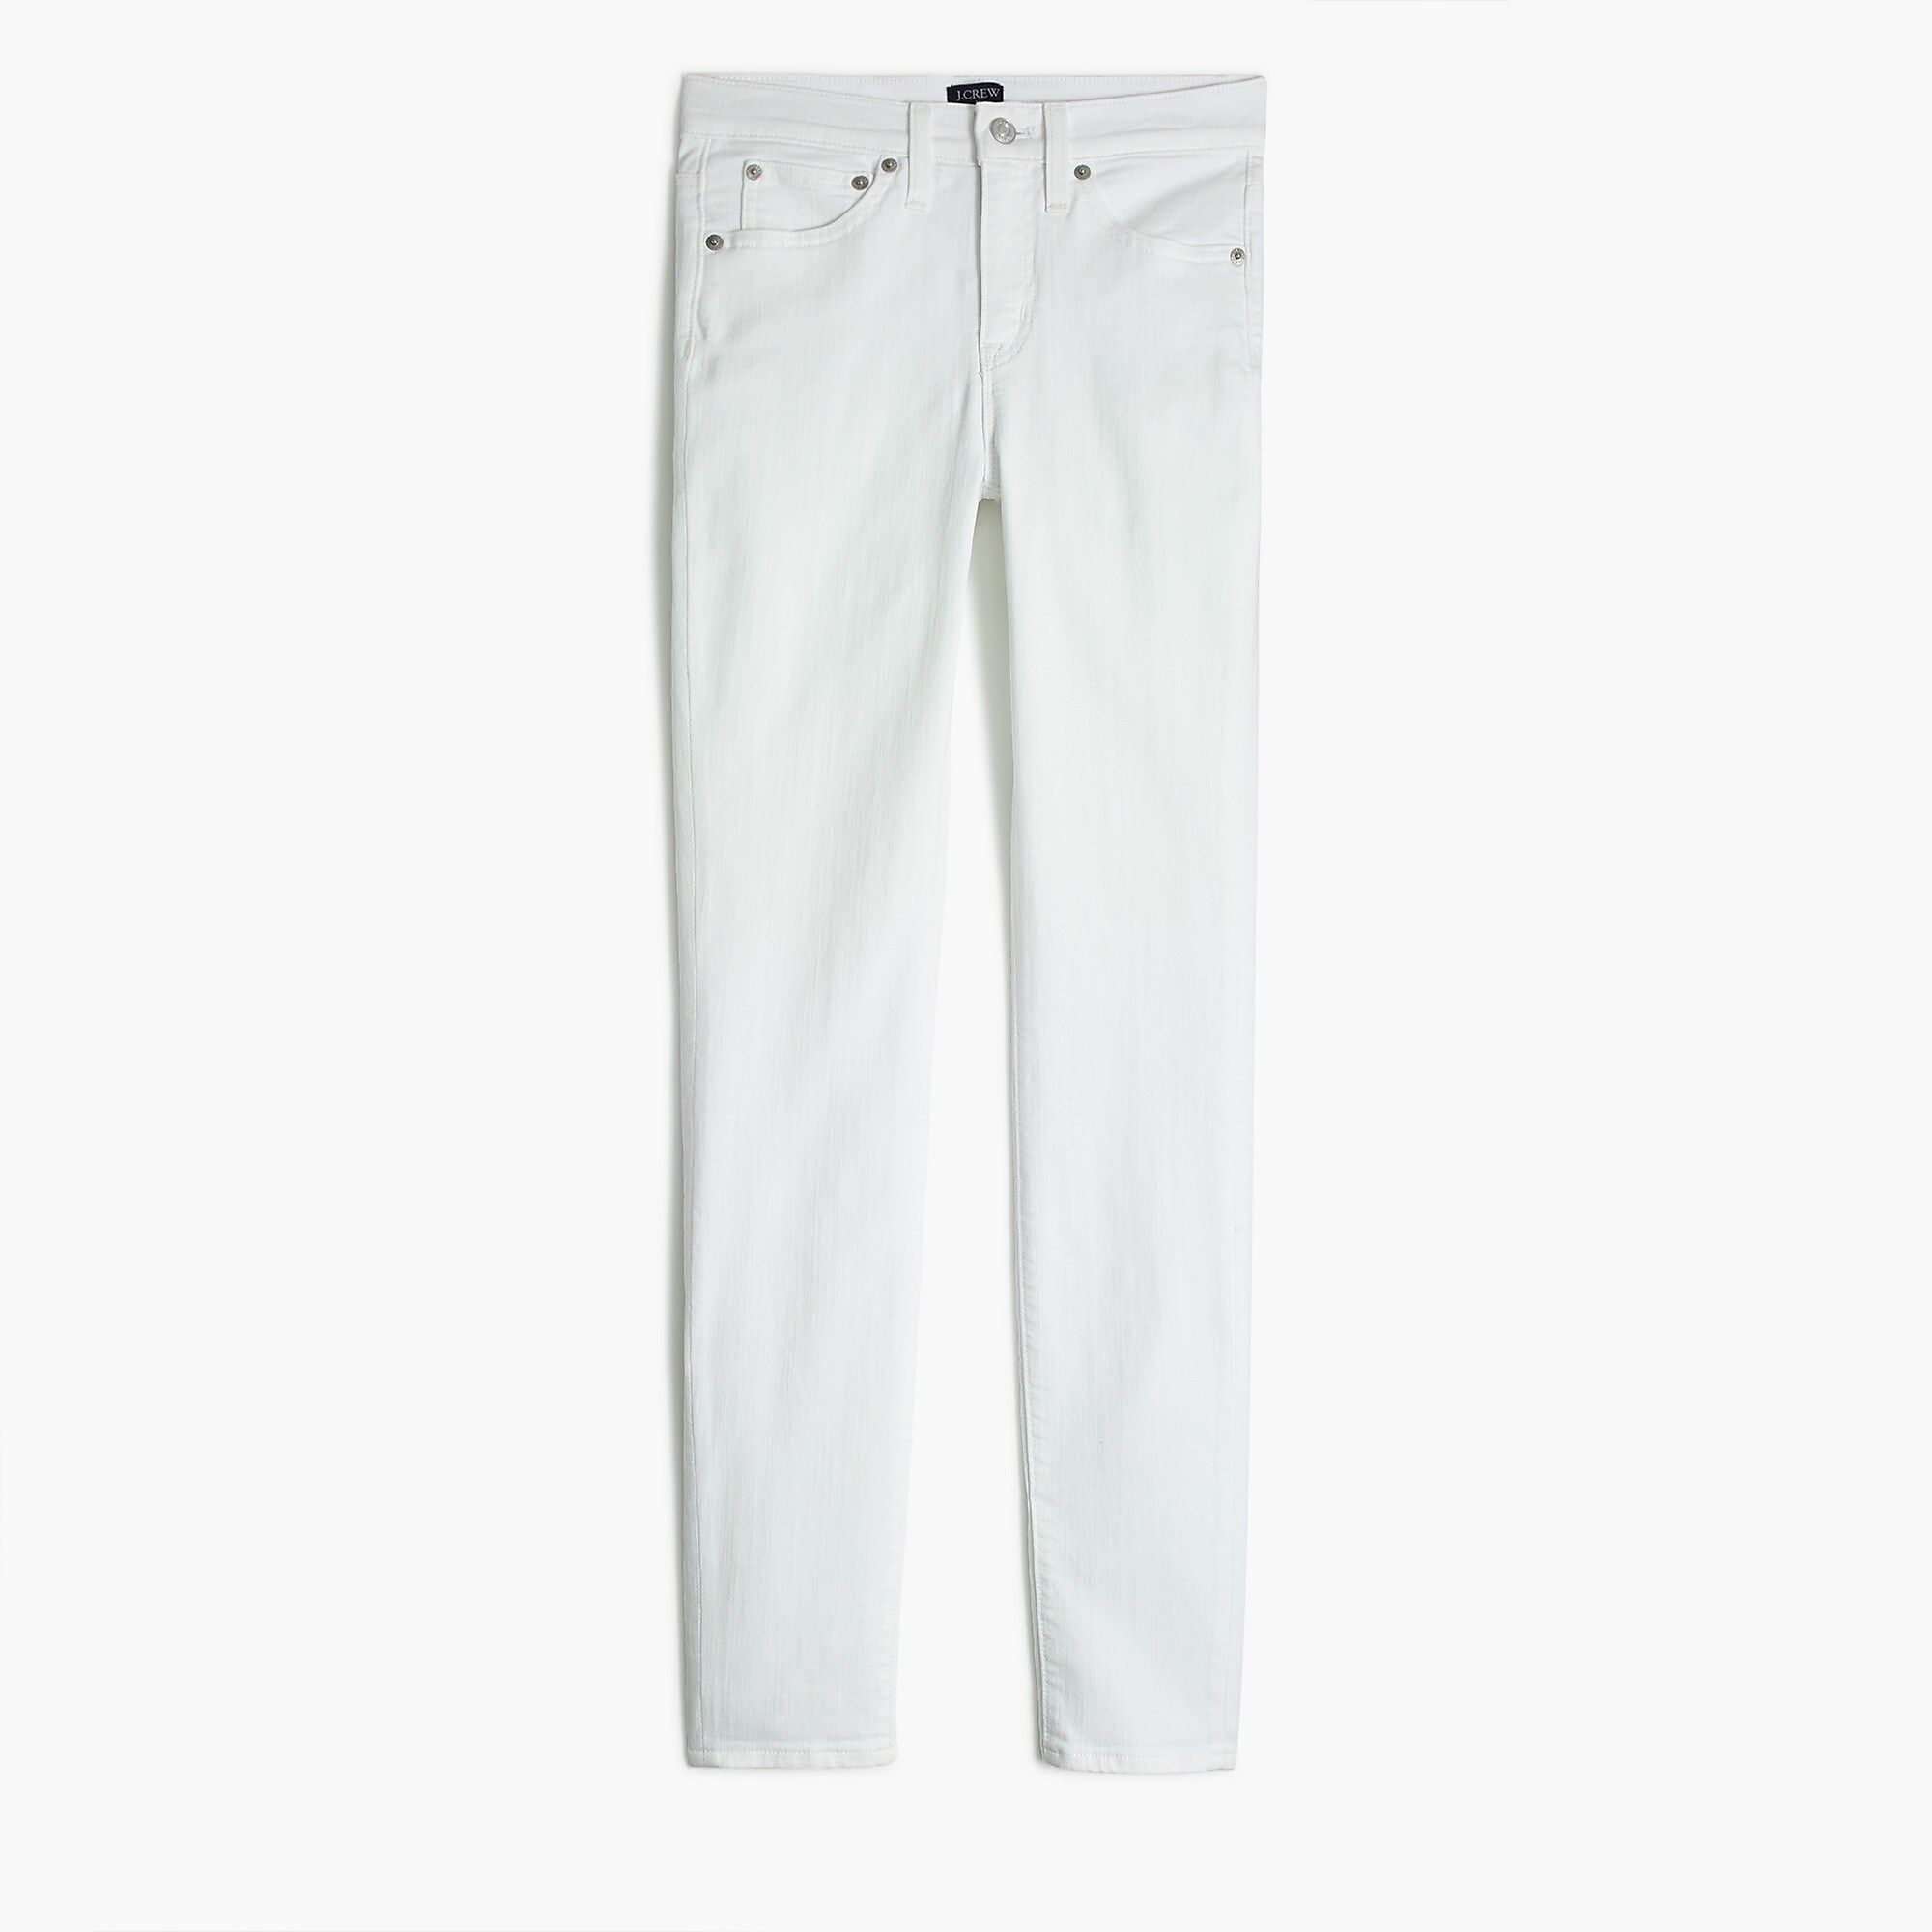 9" mid-rise white skinny jean in signature stretch | J.Crew Factory